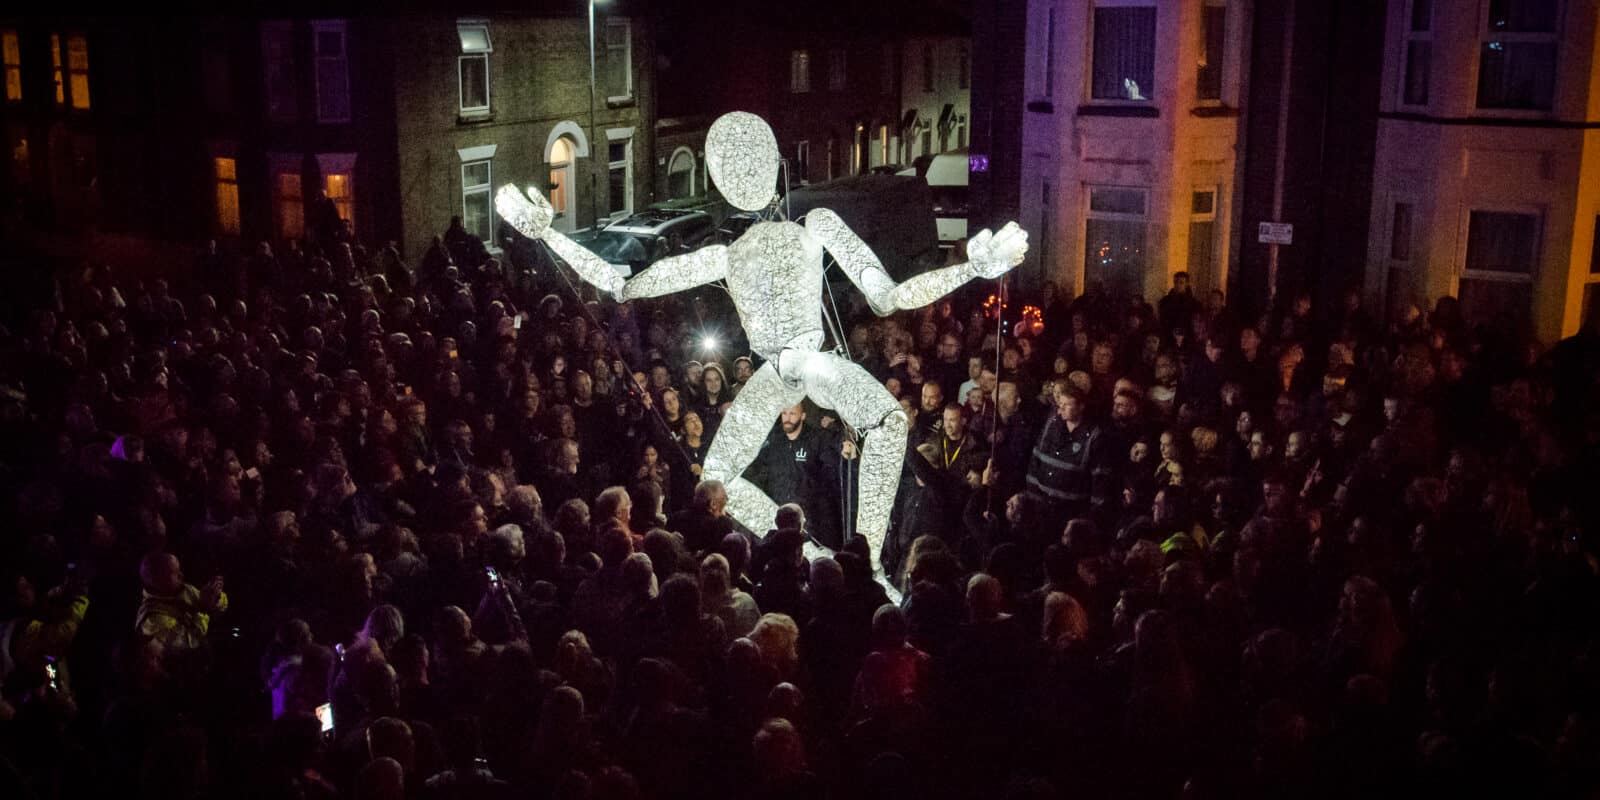 An illuminated puppet surrounded by a big crowd in a dark night.